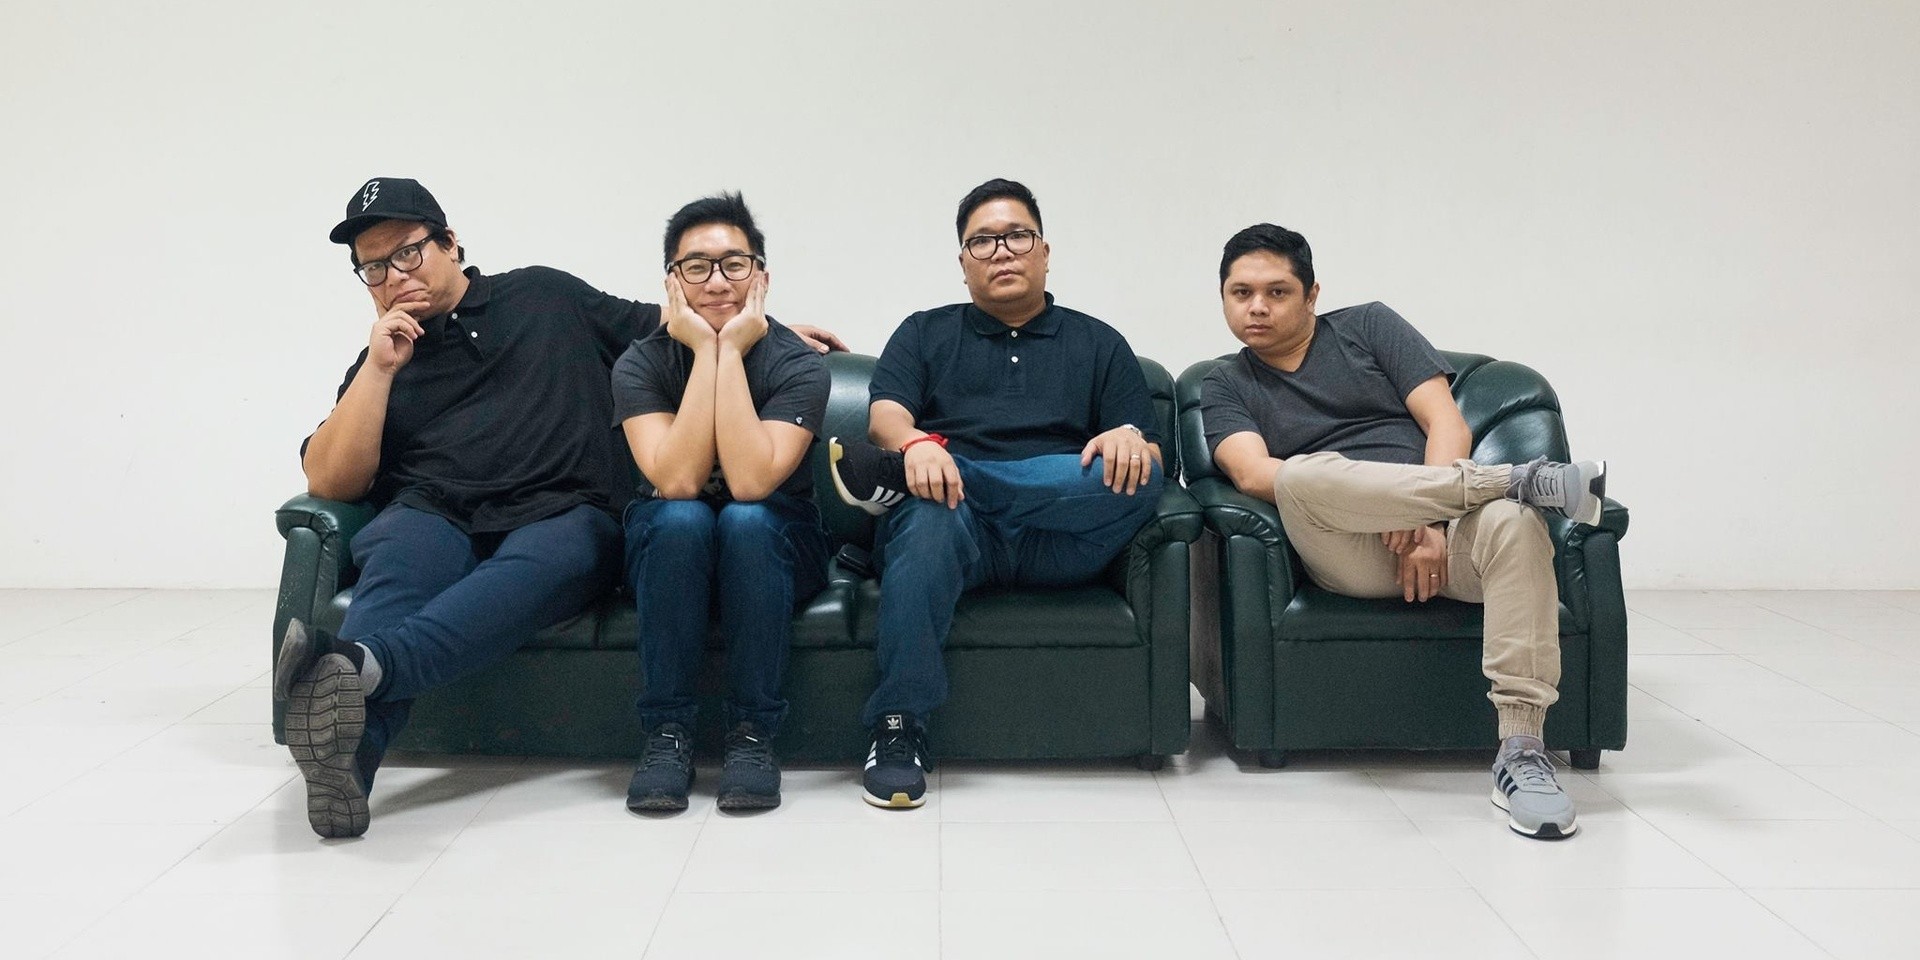 The Itchyworms to perform in Sweden this September